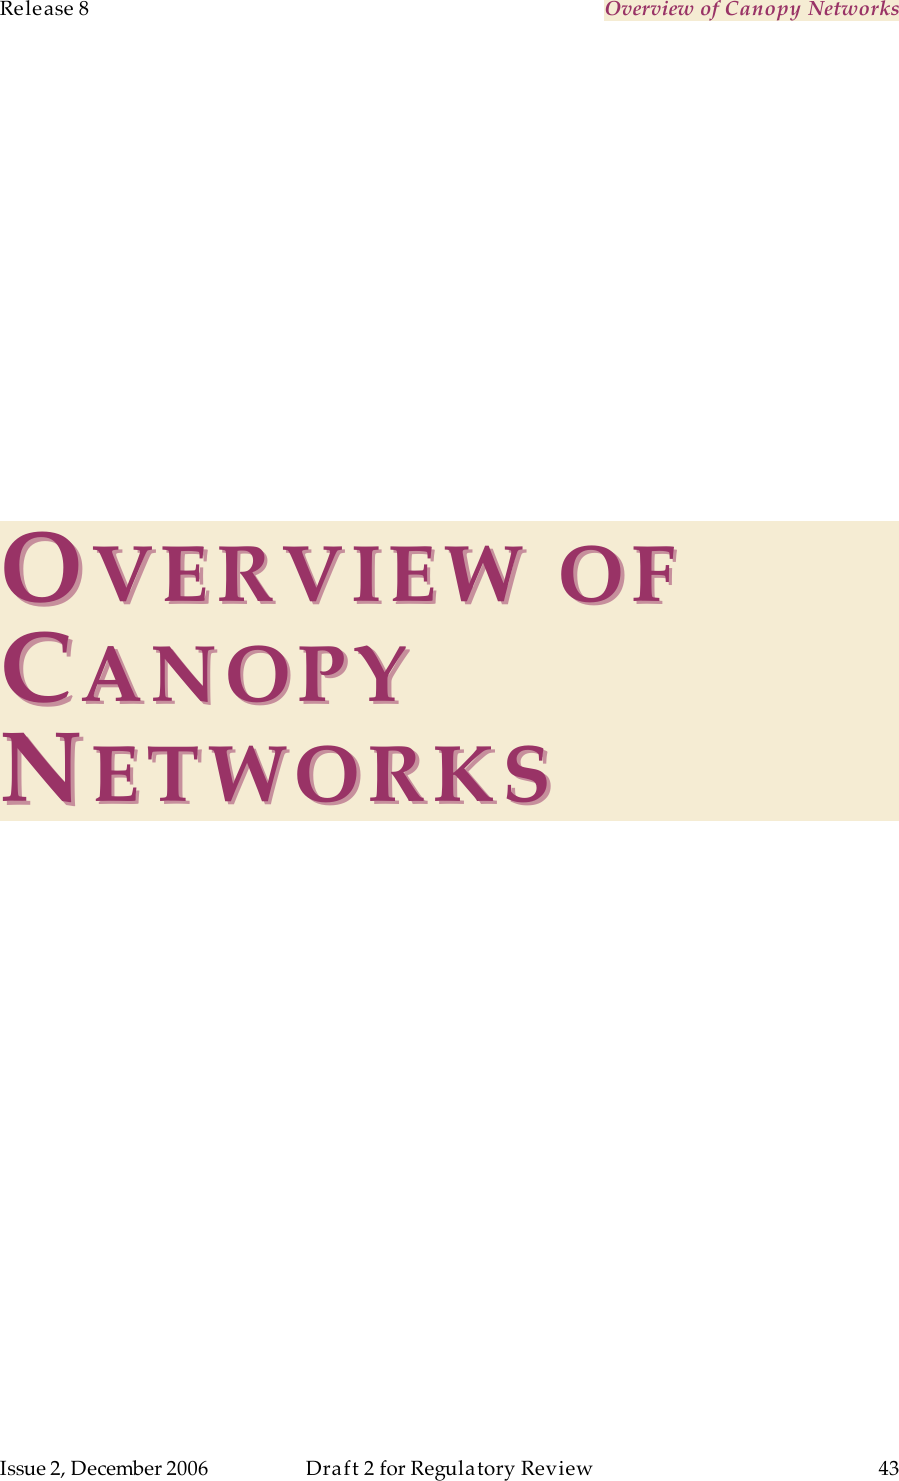 Release 8    Overview of Canopy Networks                  March 200                  Through Software Release 6.   Issue 2, December 2006  Draft 2 for Regulatory Review  43     OOVERVIEW OF VERVIEW OF CCANOPYANOPY   NNETWORKSETWORKS   